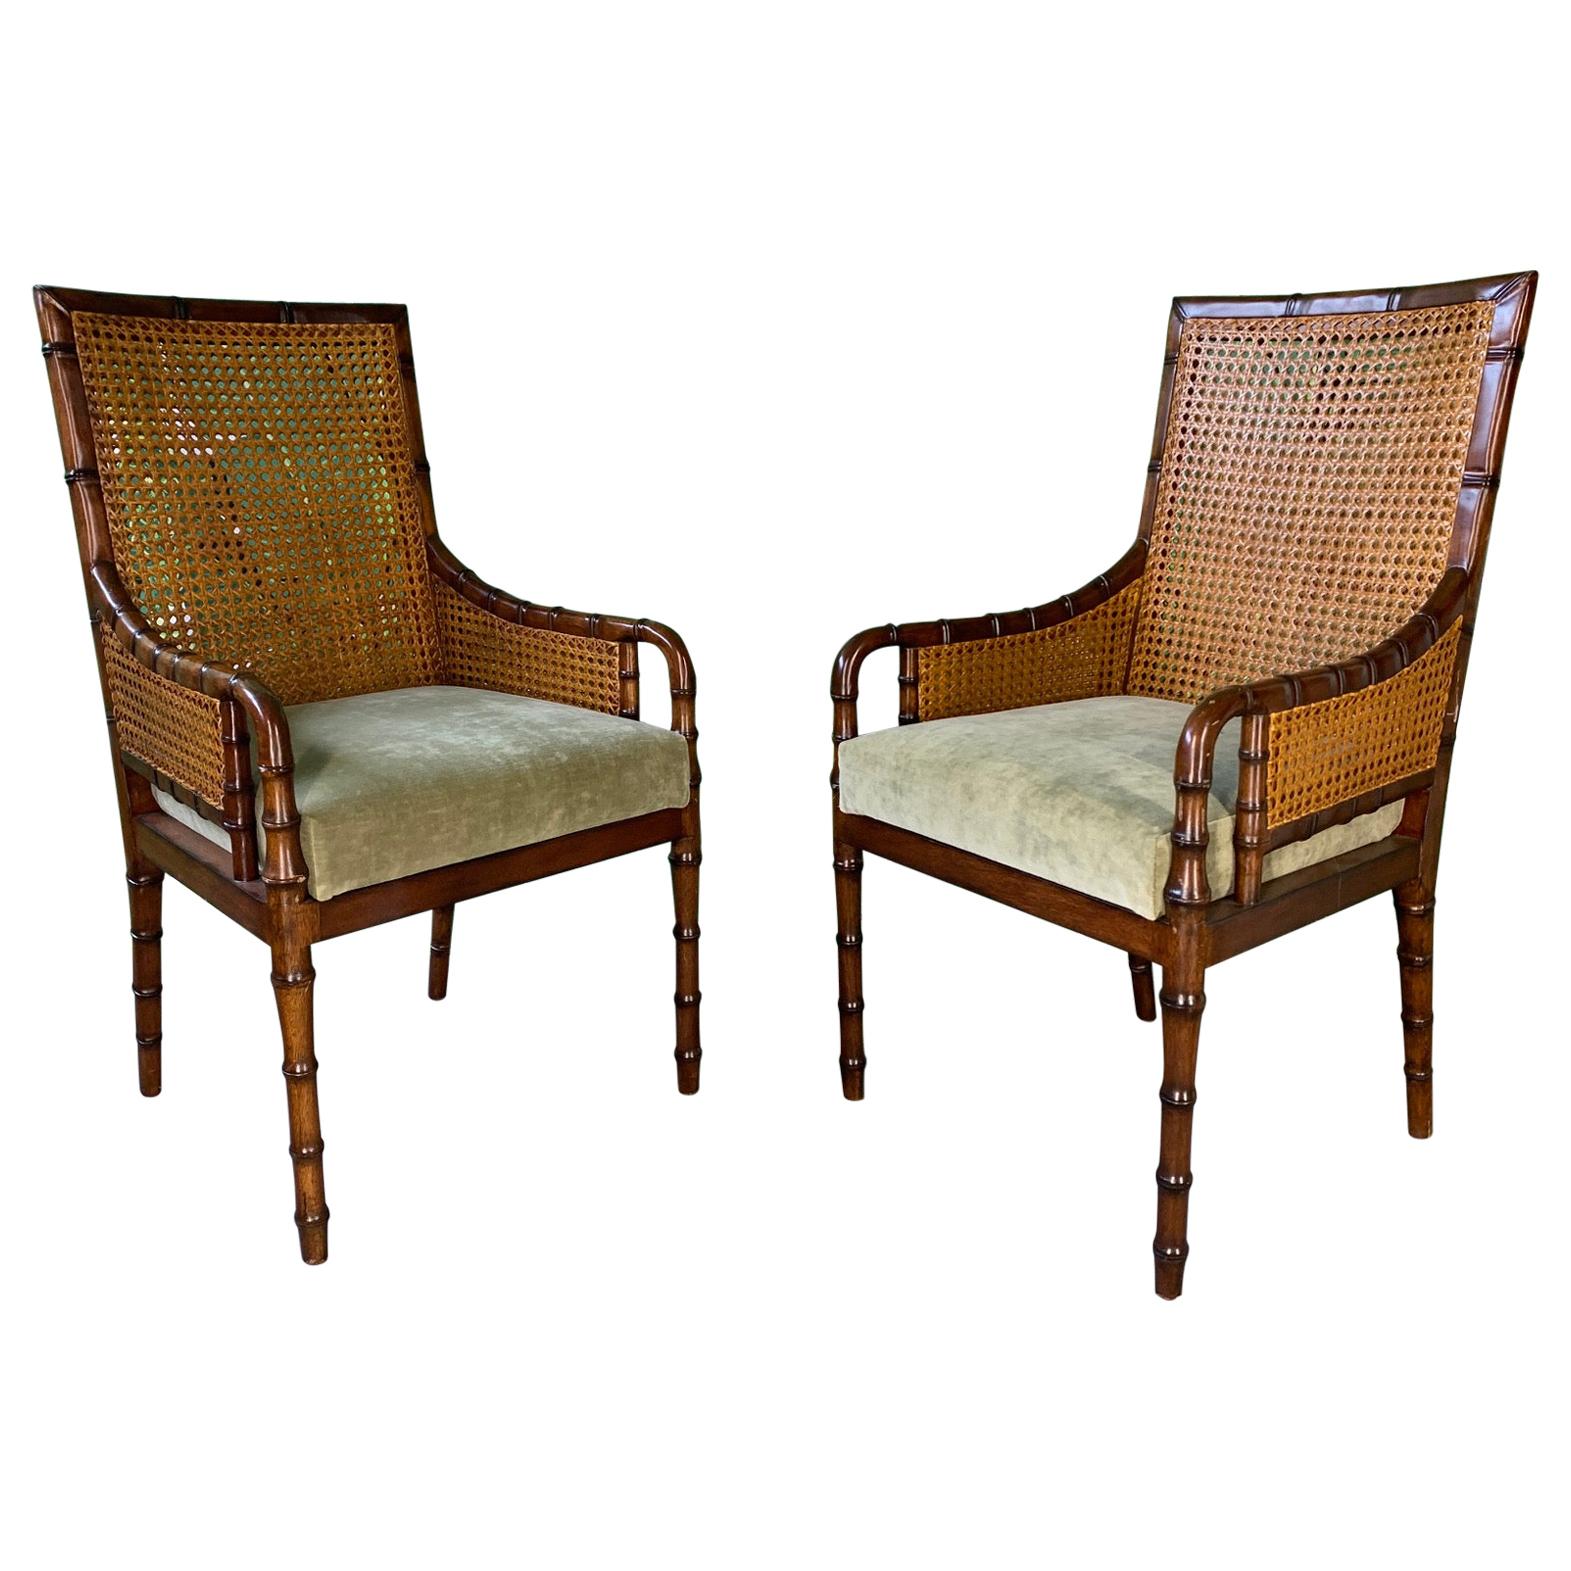 Pair of Cane Back Faux Bamboo Armchairs by Palecek